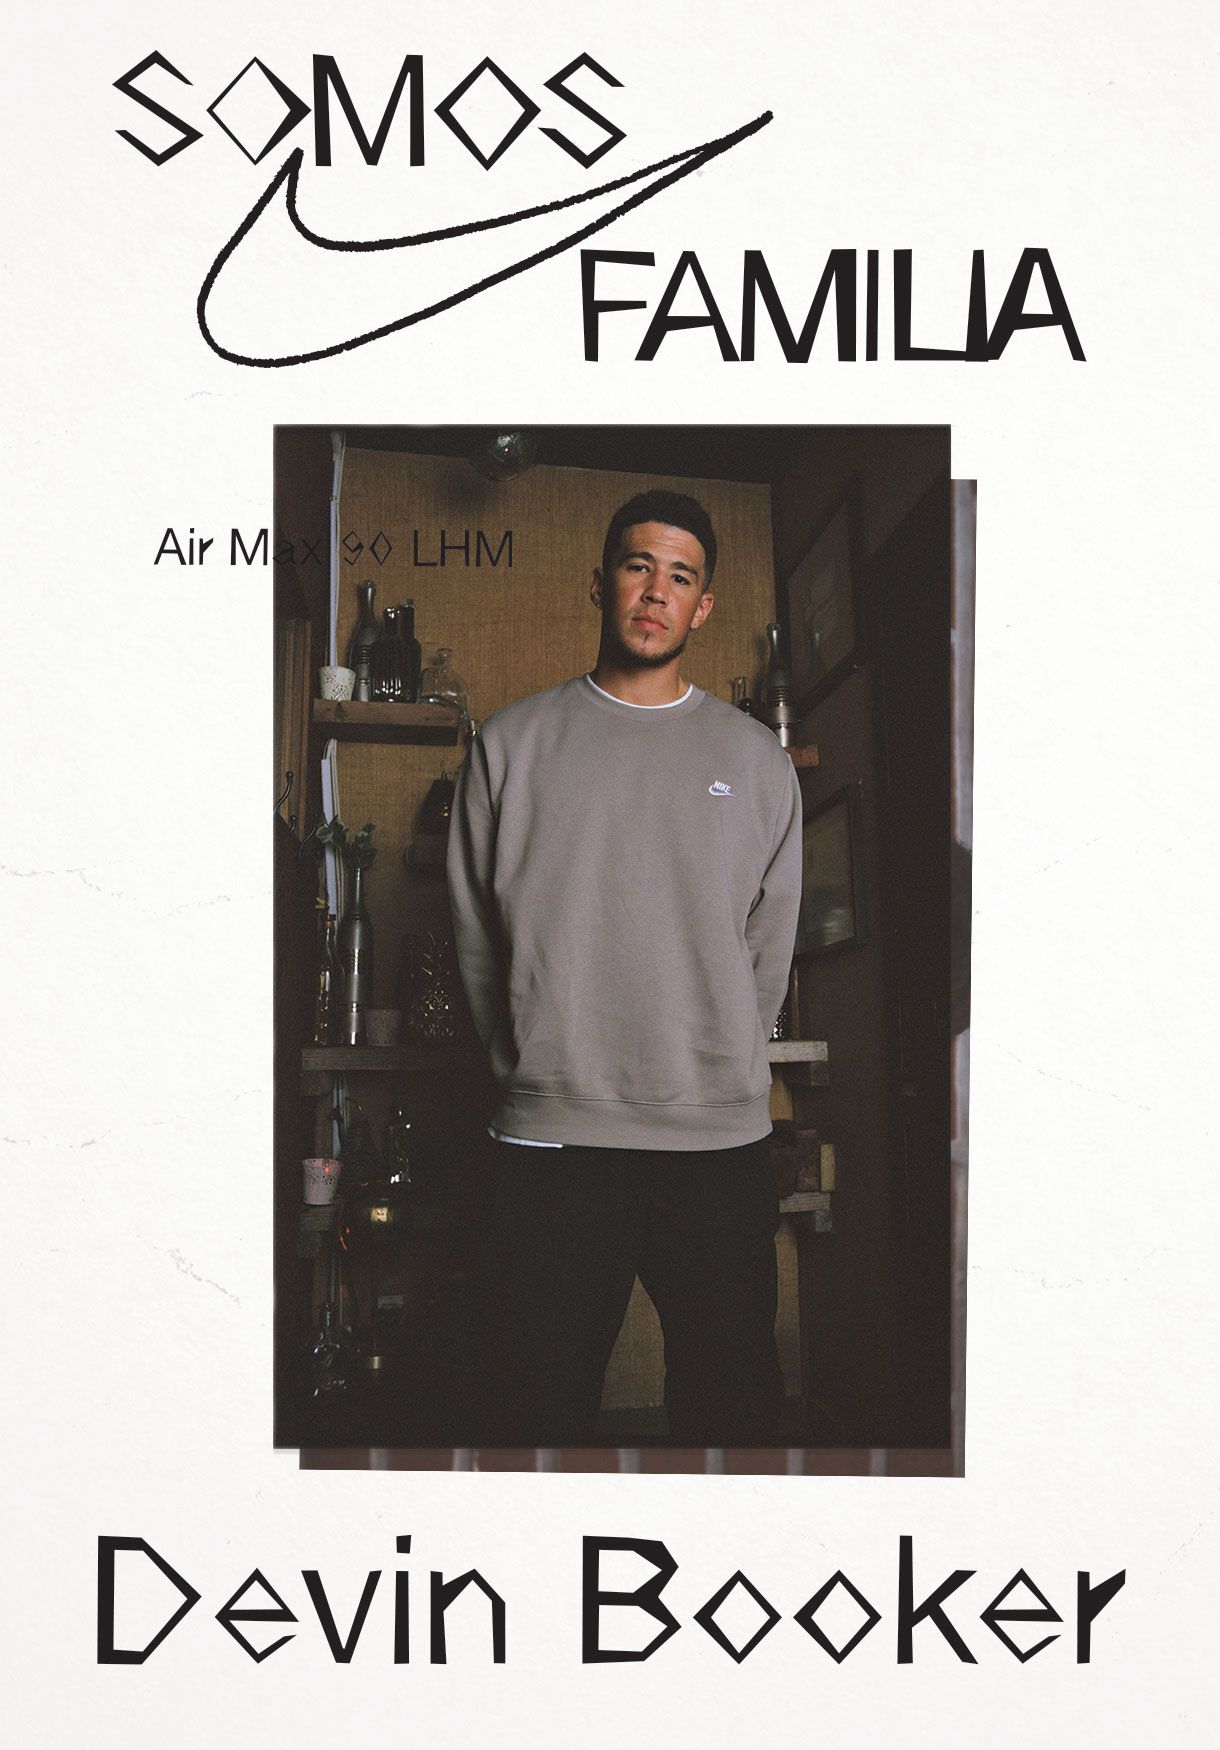 Somos Familia AirMax 90 LHM Devin Booker - Devin standing while wearing gray Nike sweatshirt